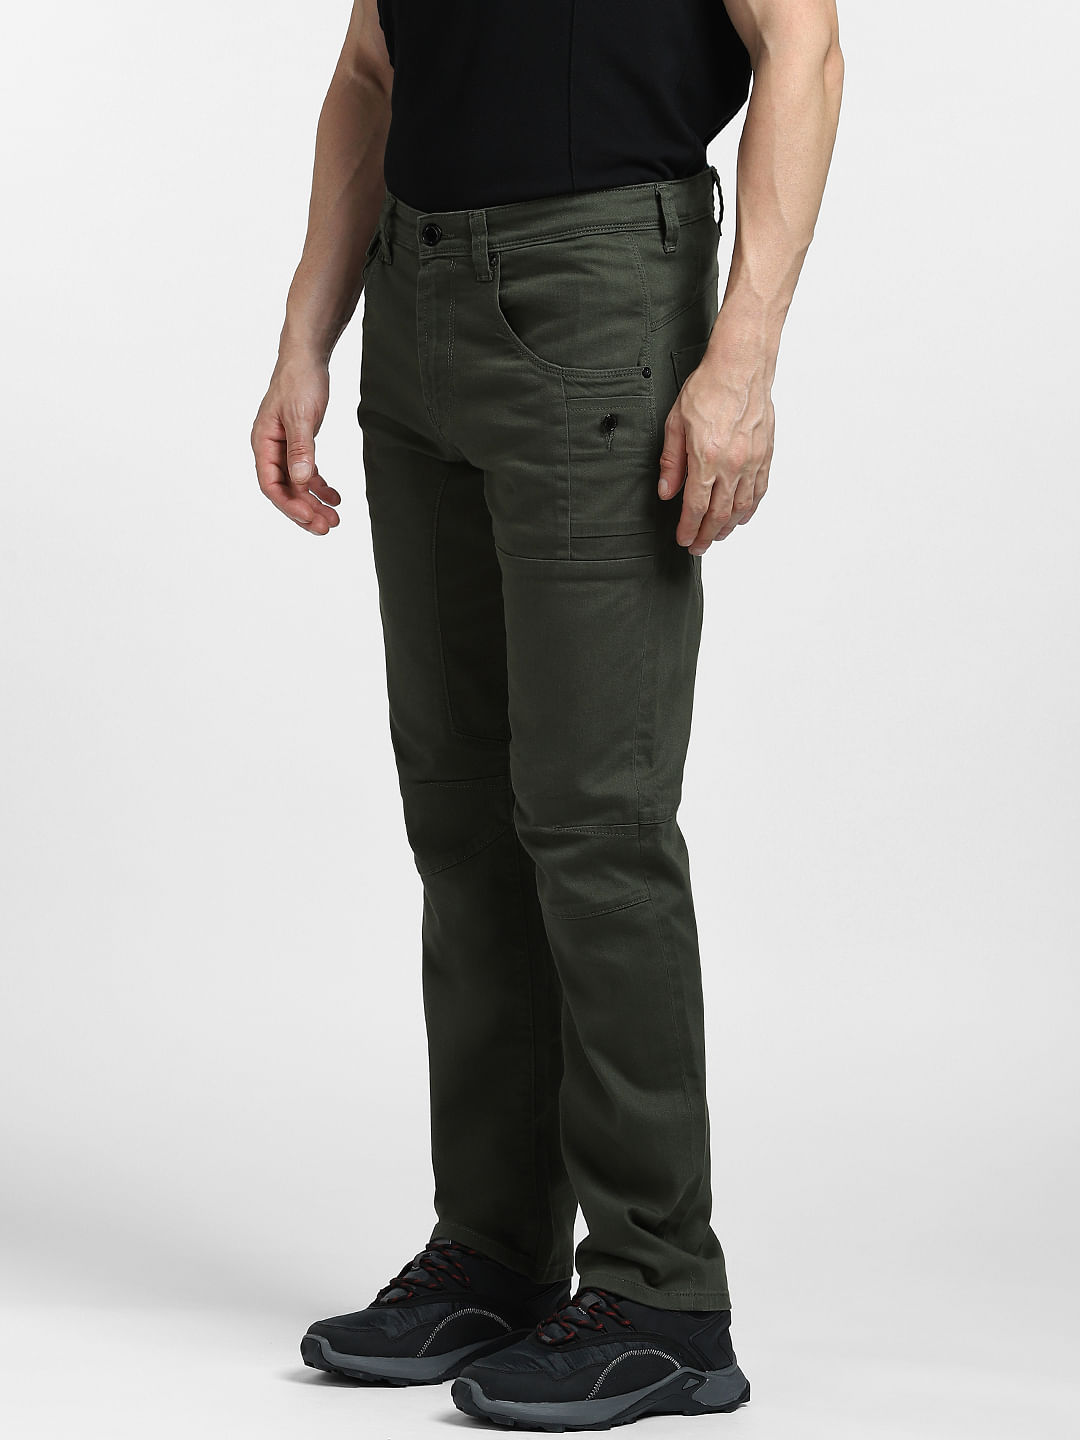 flannel + cargo pants | Olive green pants outfit, Green cargo pants outfit, Green  pants outfit